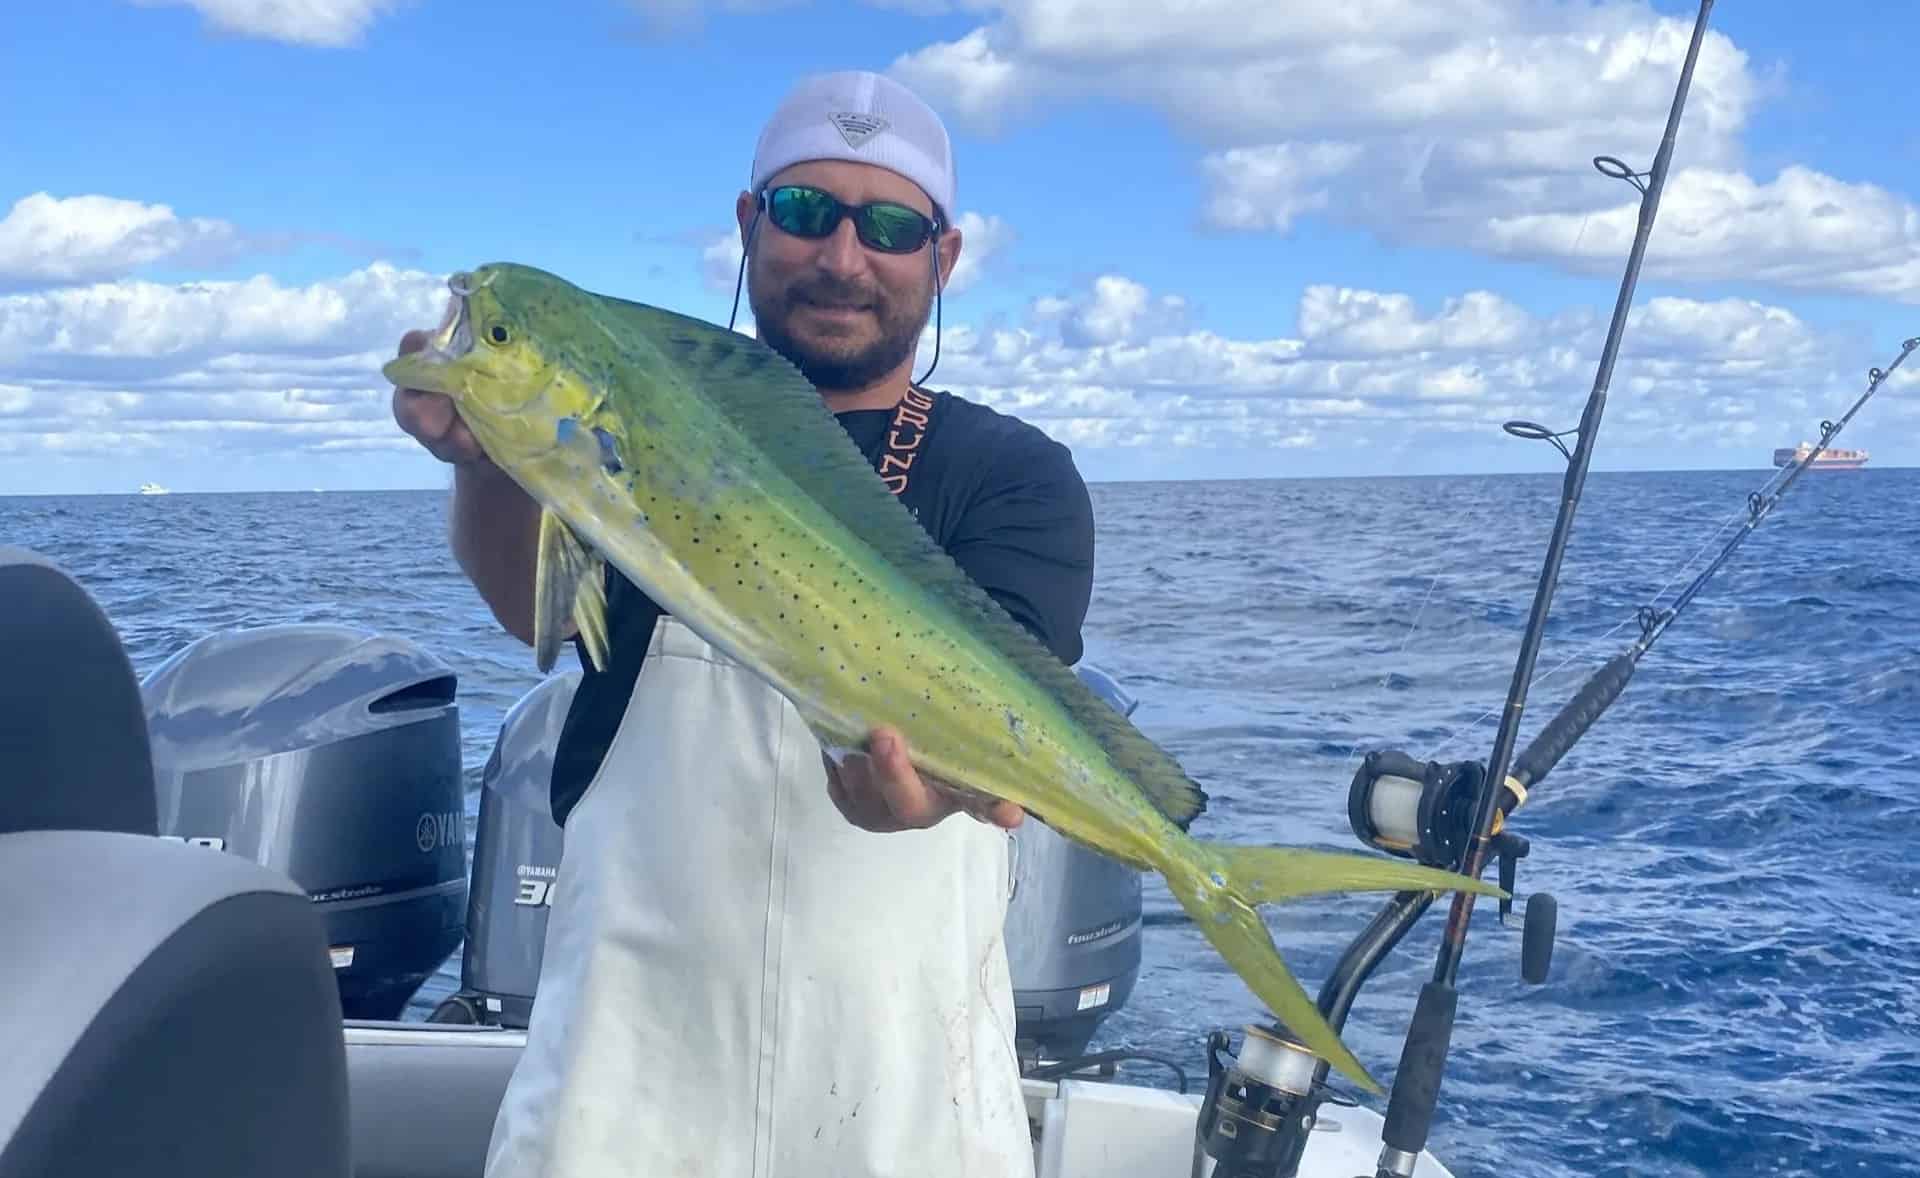 4-Hour-Miami-Midnight-Express-Fishing-Charter